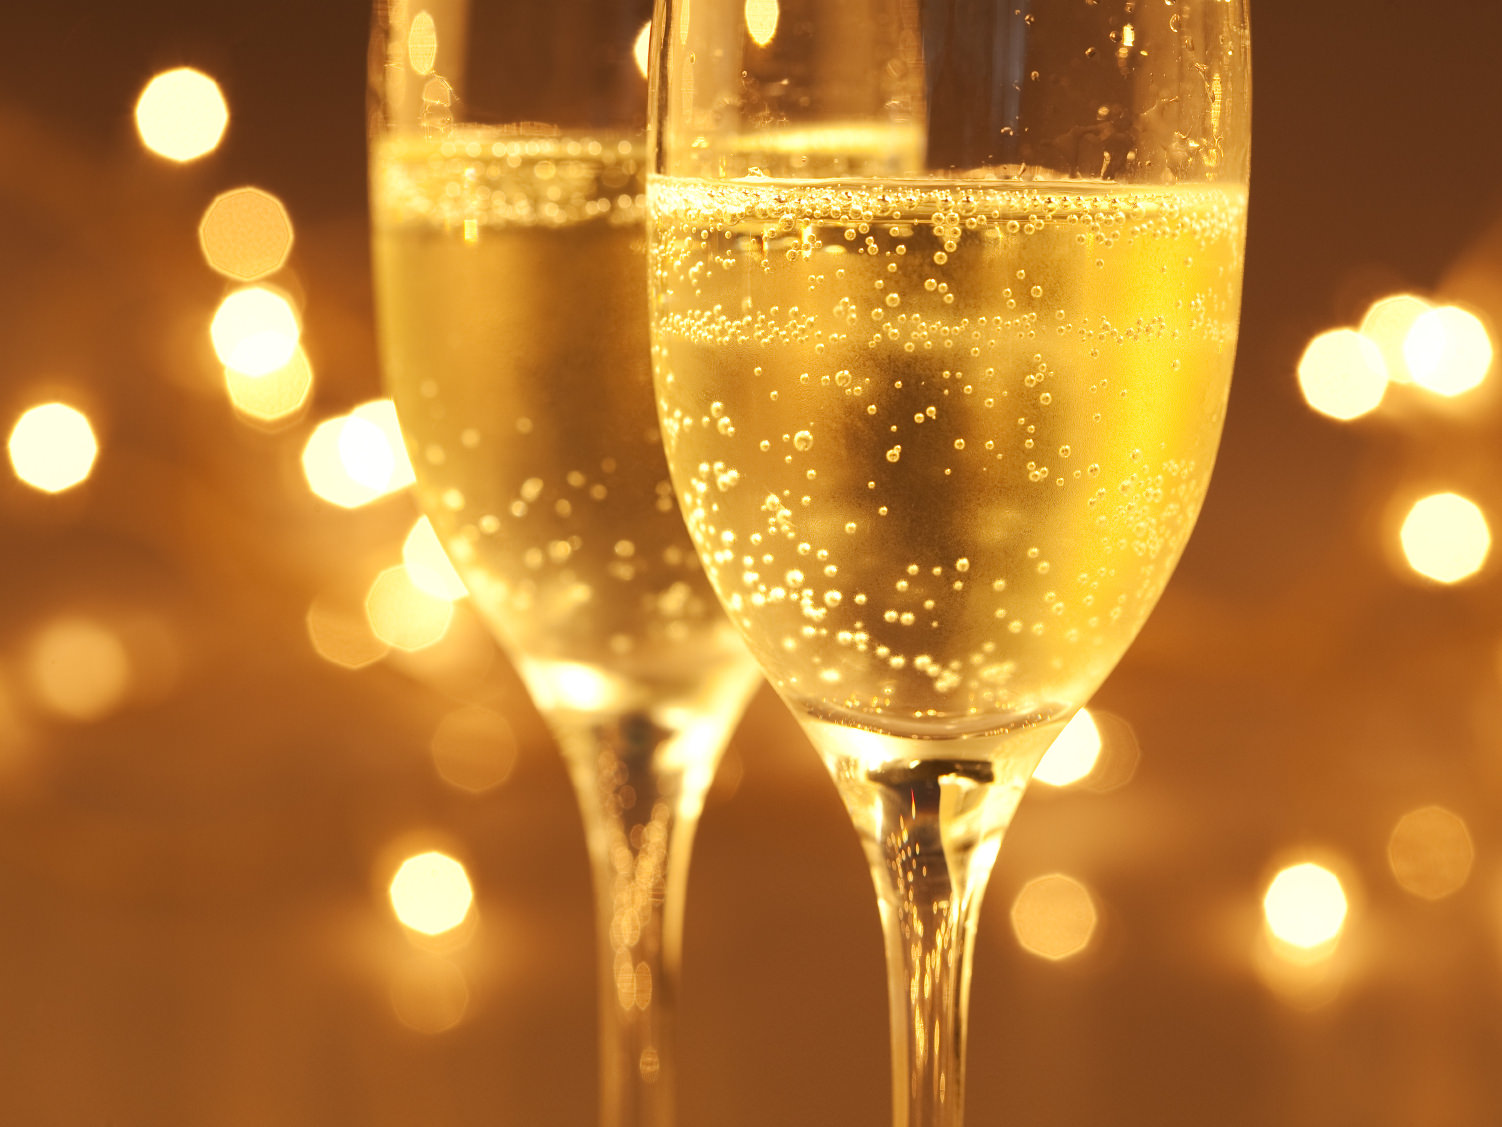 The bubbles in champagne tickle the tongue and transfer wonderful aromas to the nose.